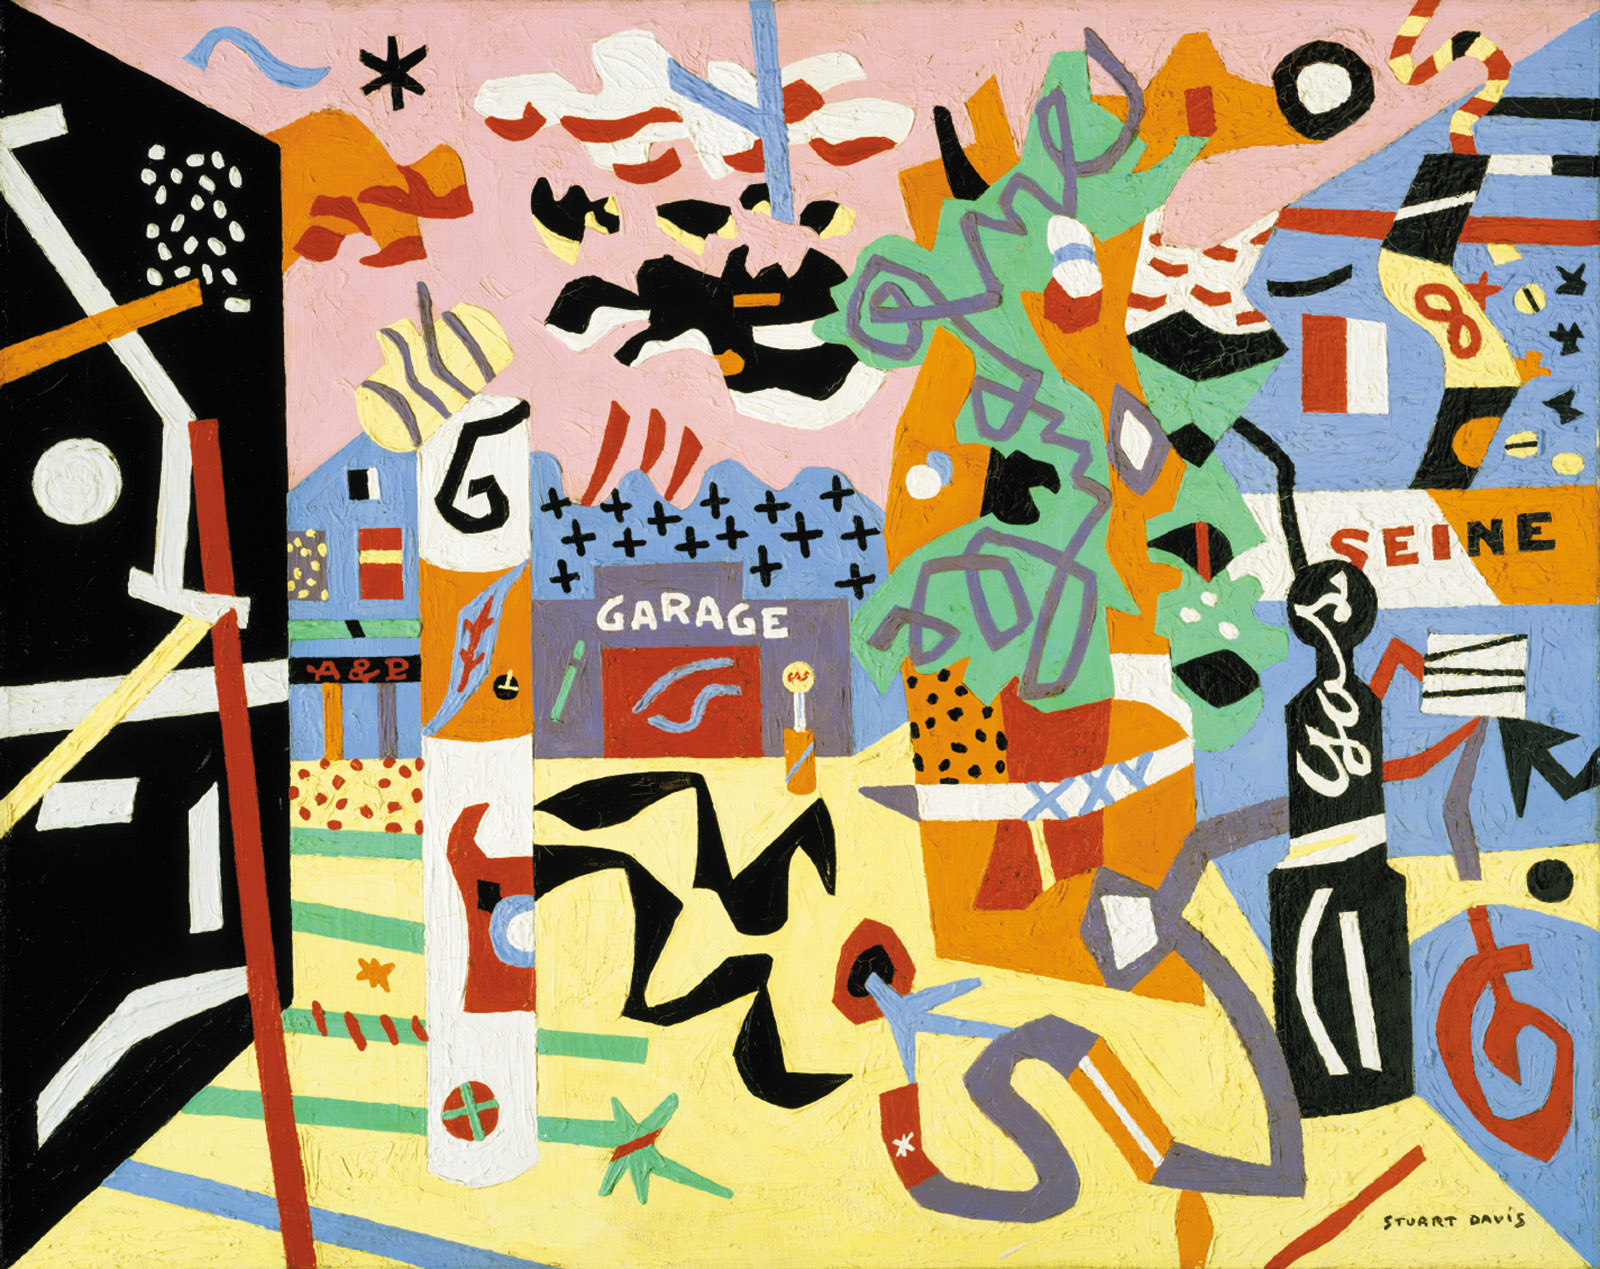 Stuart Davis: Report from Rockport, 24 x 30 inches, 1940